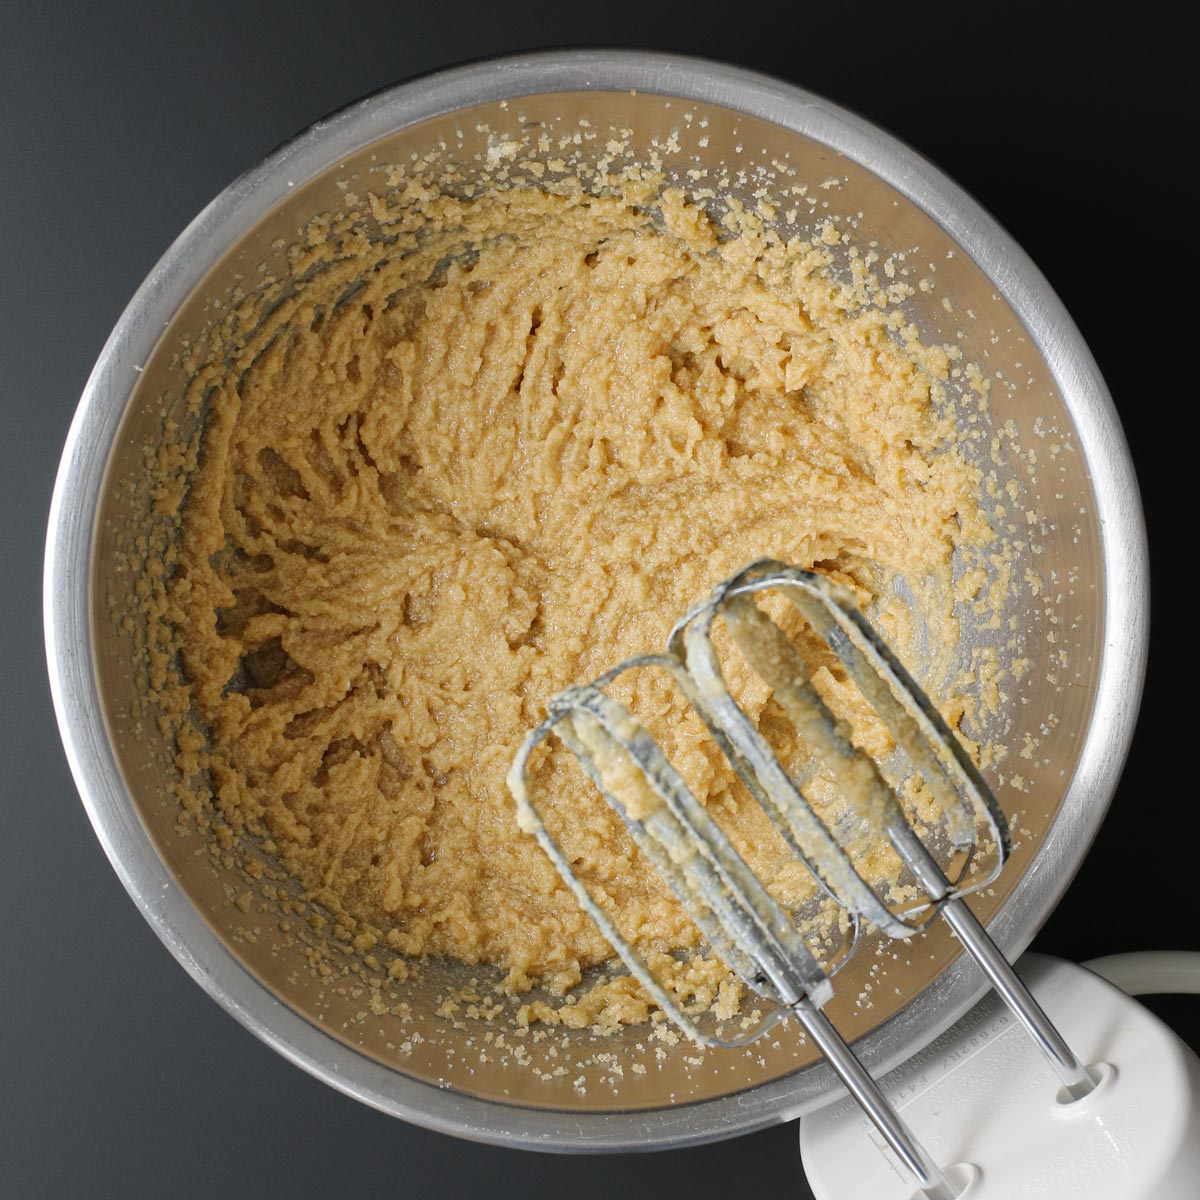 butter sugar mixture in bowl with beaters.